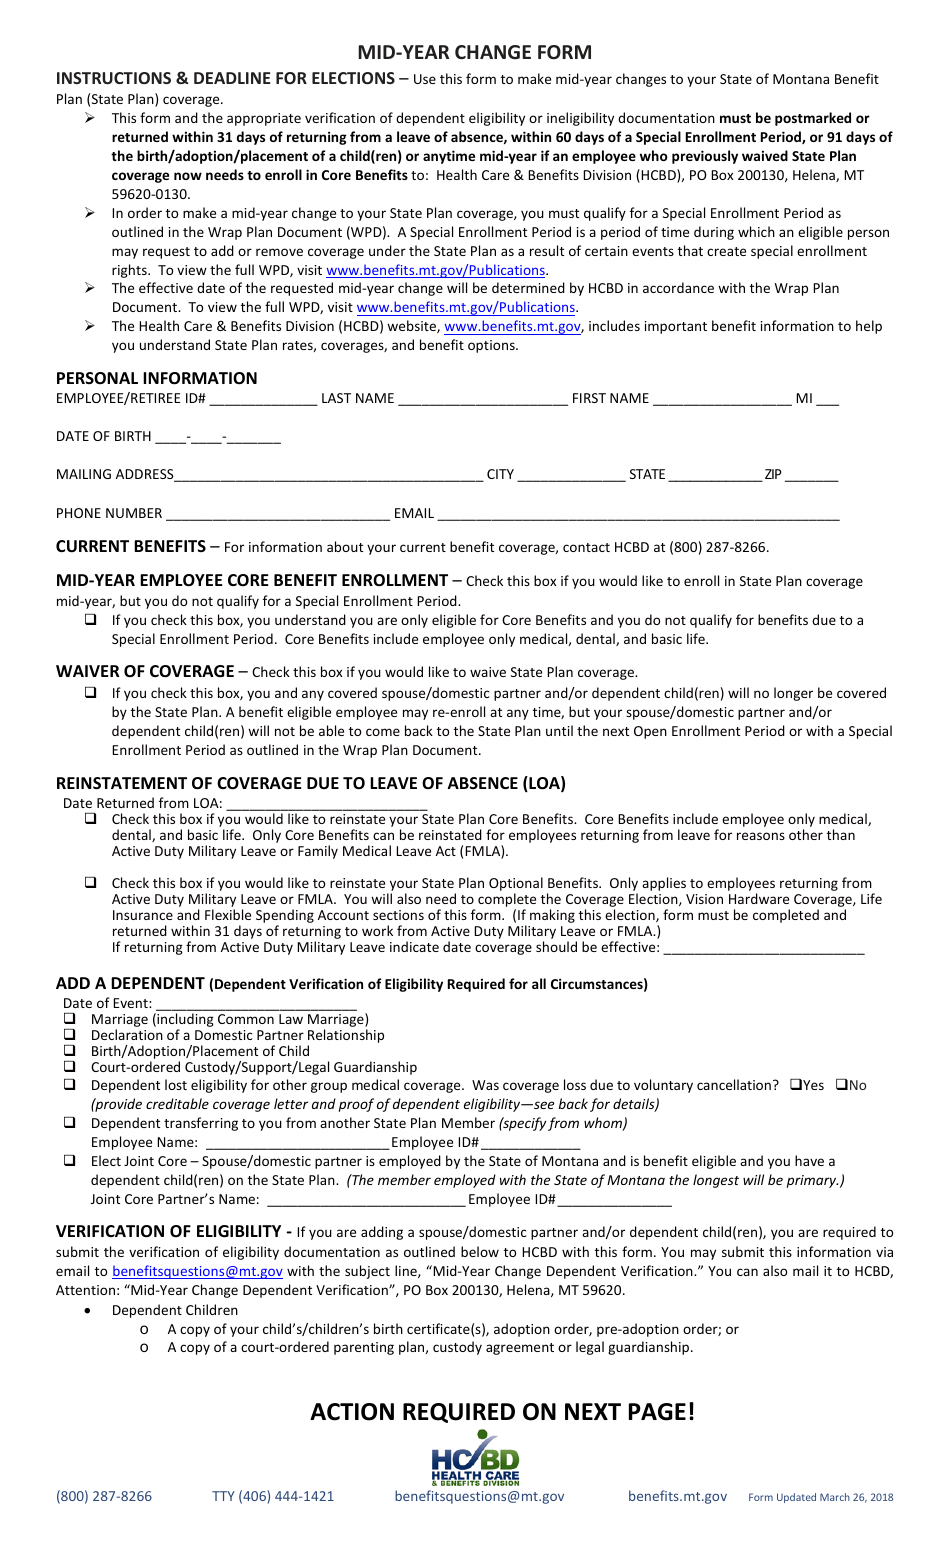 Mid-year Change Form - Montana, Page 1